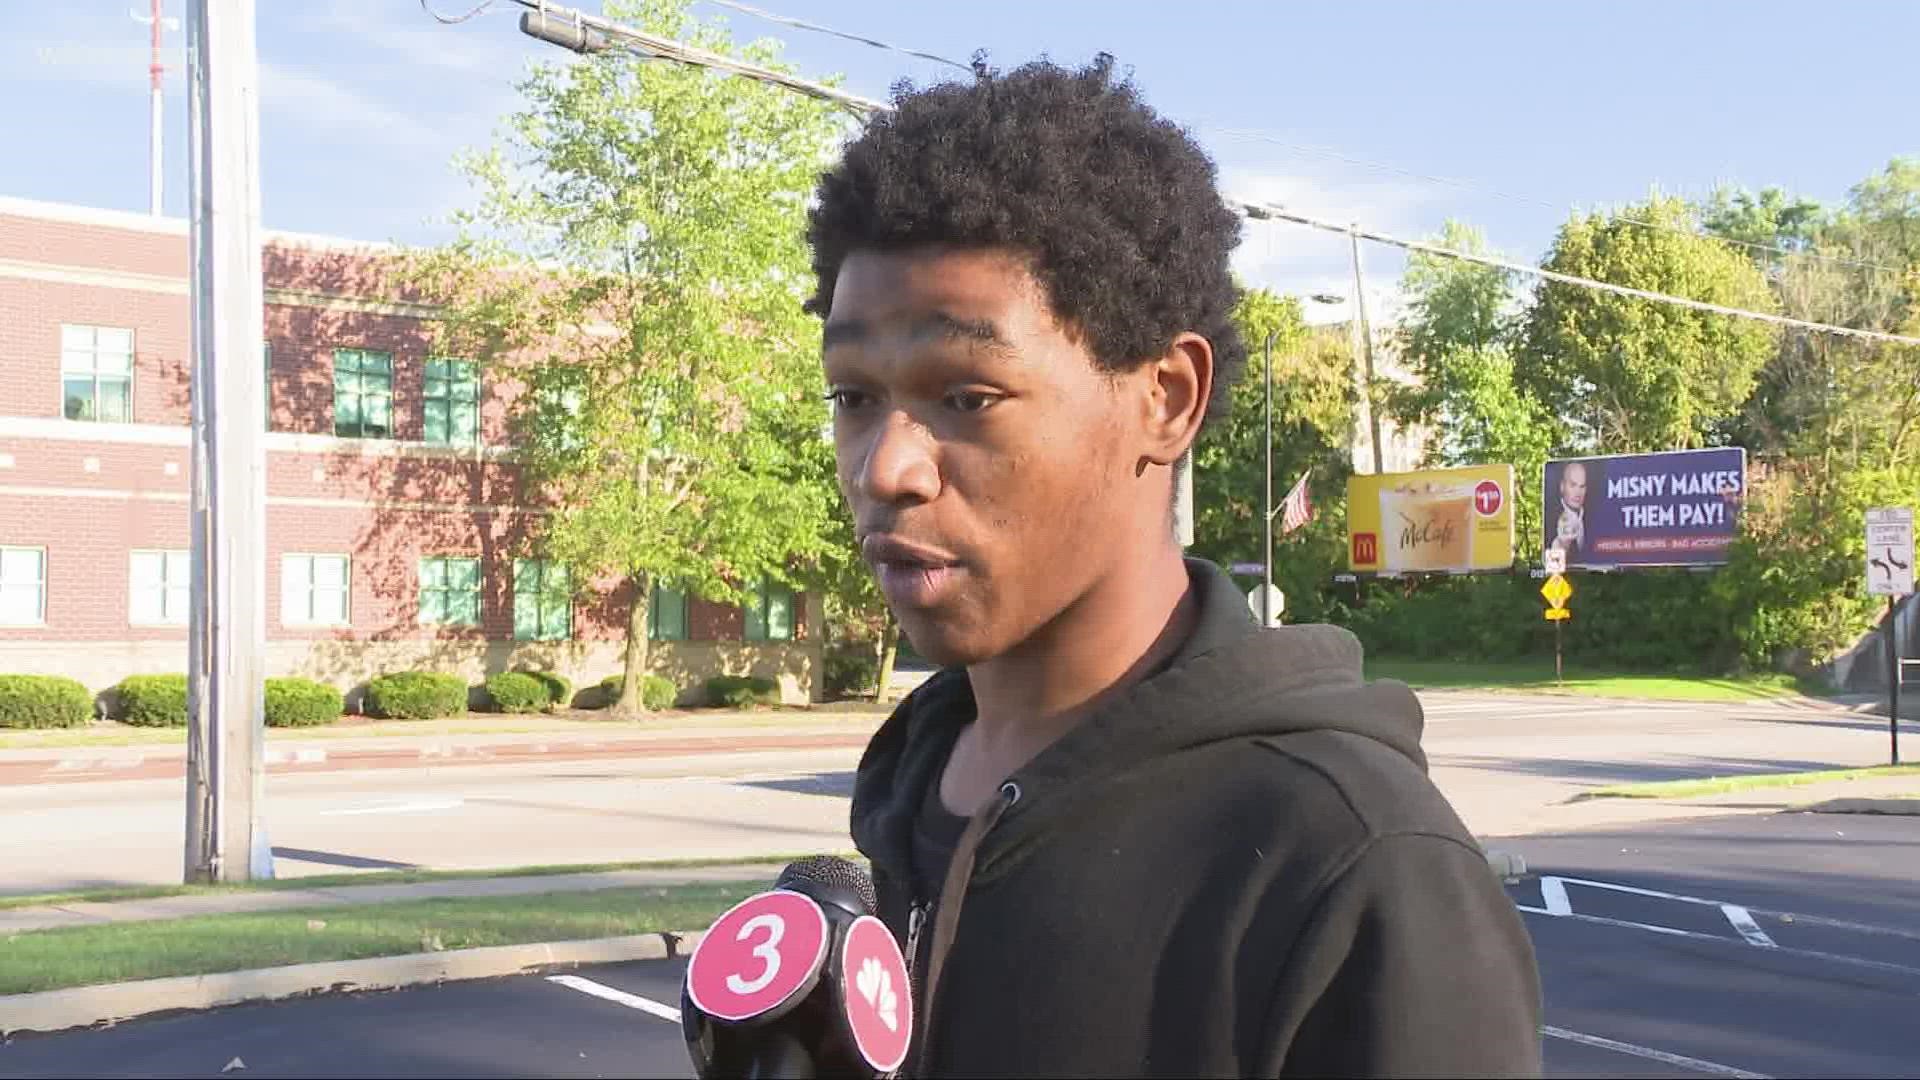 18-year-old Markese White had his head smashed into pavement by an Elyria police officer. Today, he is speaking out.